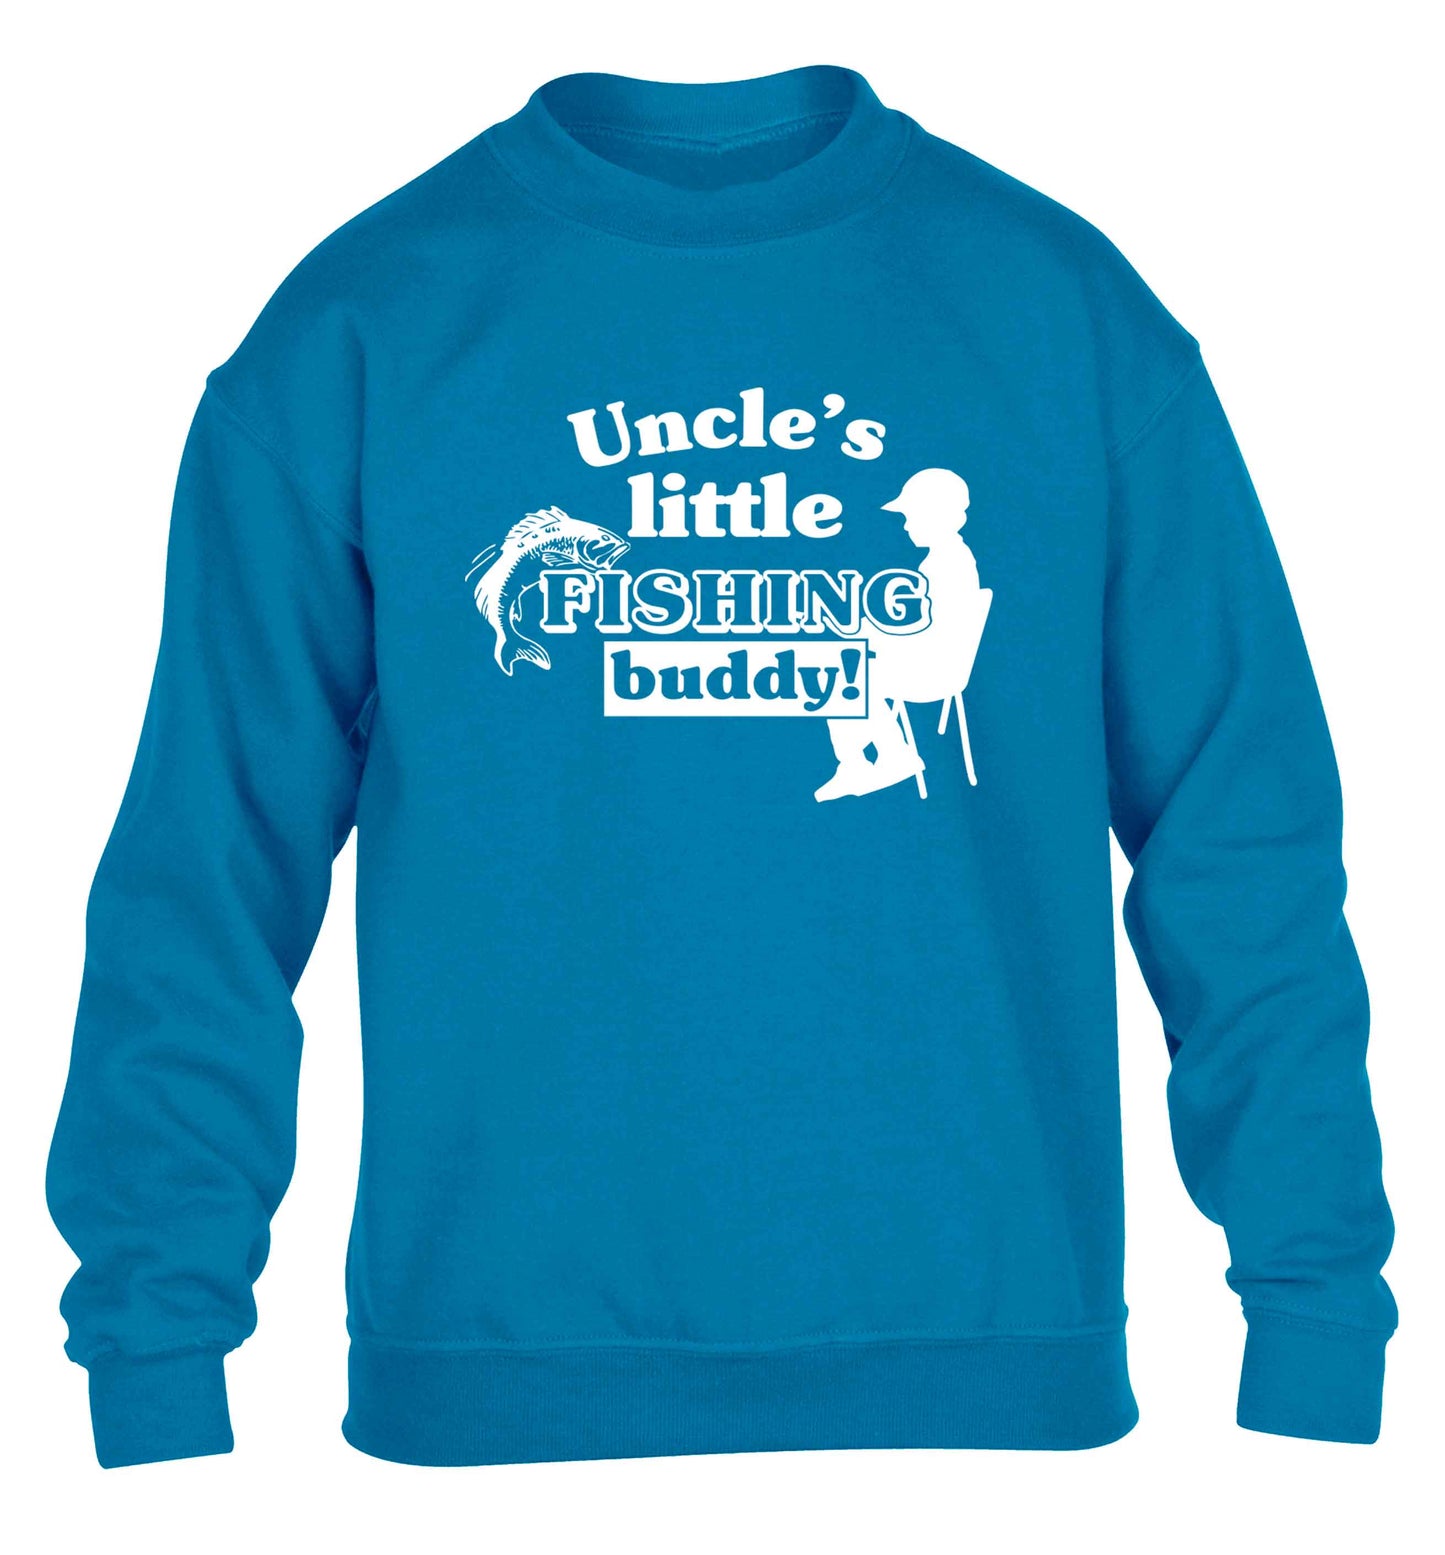 Uncle's little fishing buddy children's blue sweater 12-13 Years